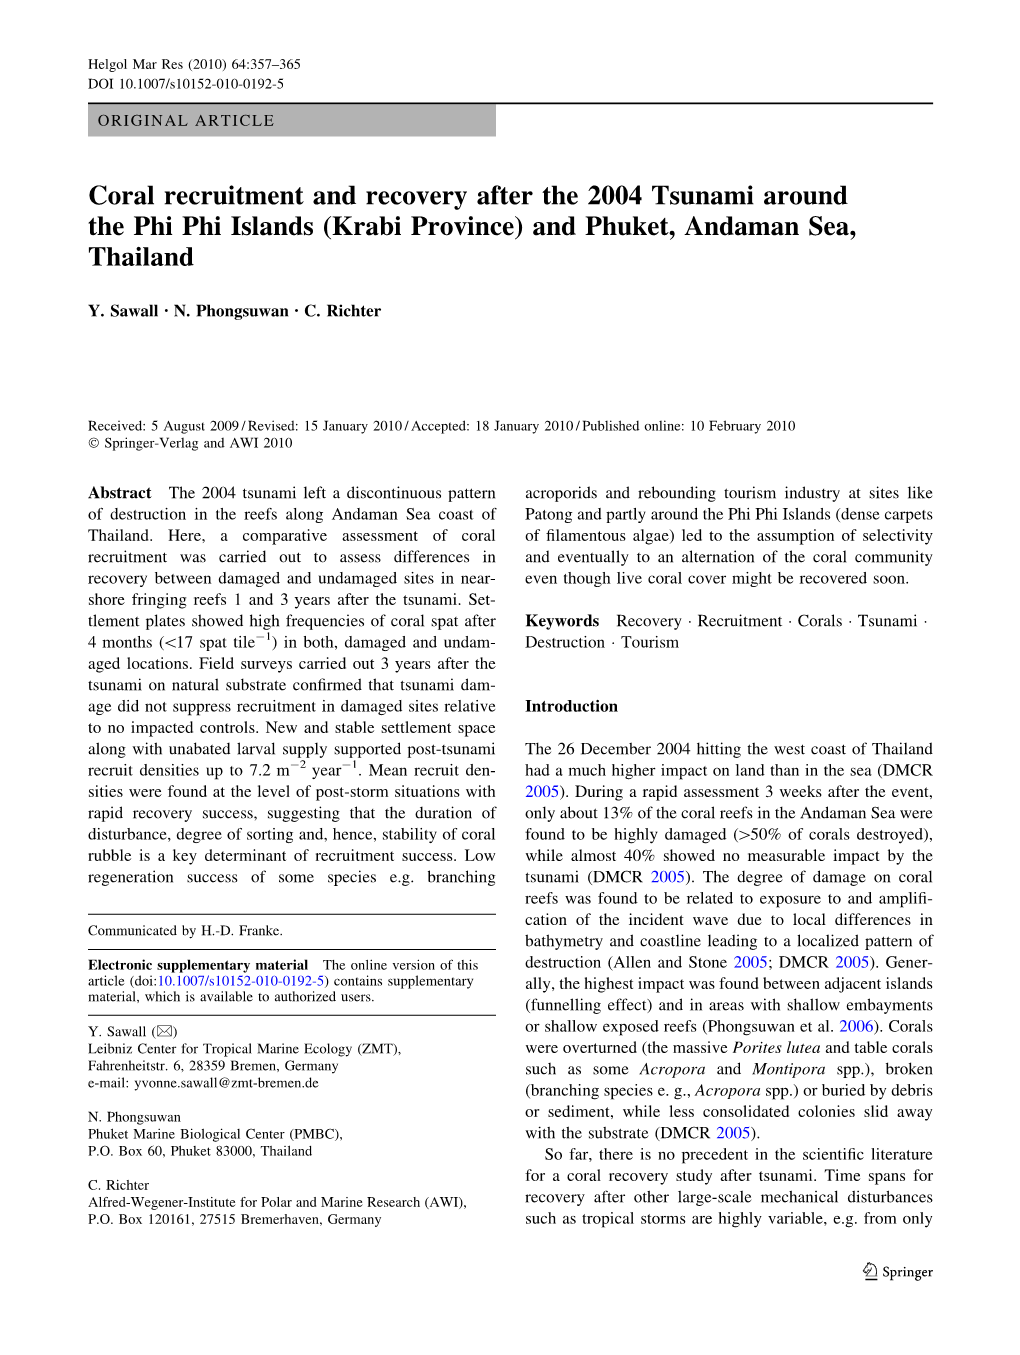 Coral Recruitment and Recovery After the 2004 Tsunami Around the Phi Phi Islands (Krabi Province) and Phuket, Andaman Sea, Thailand